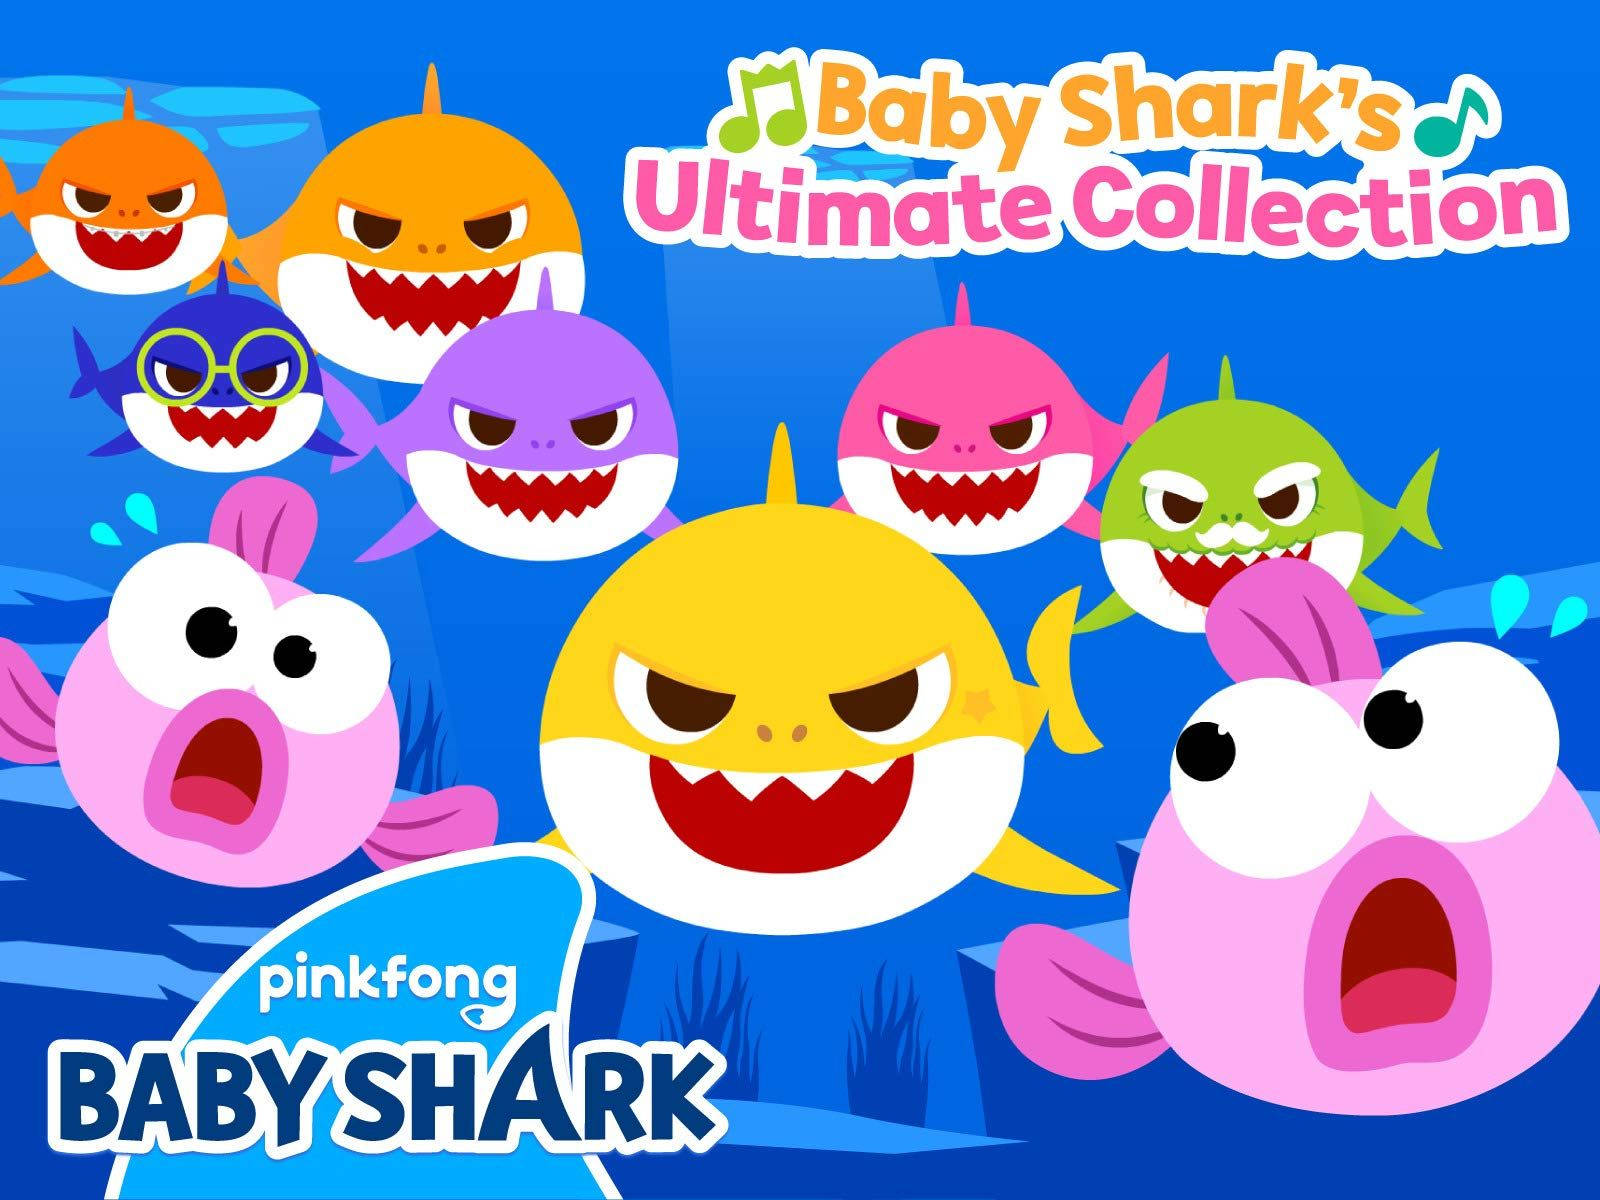 Pinkfong Baby Shark Ultimate Collection Wallpaper